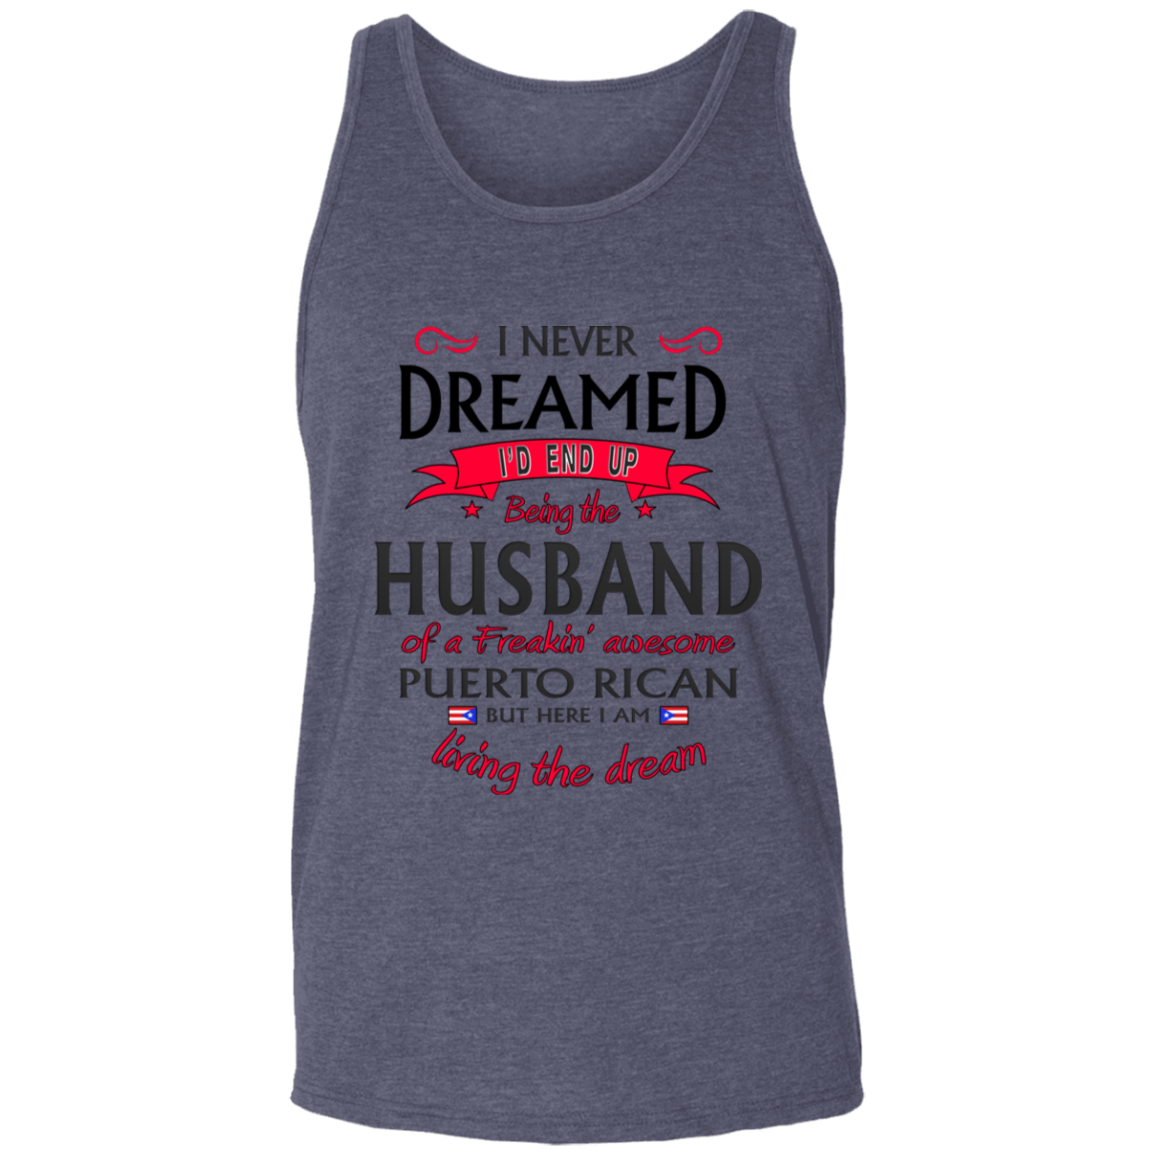 Husband of Awesome PR Unisex Tank - Puerto Rican Pride